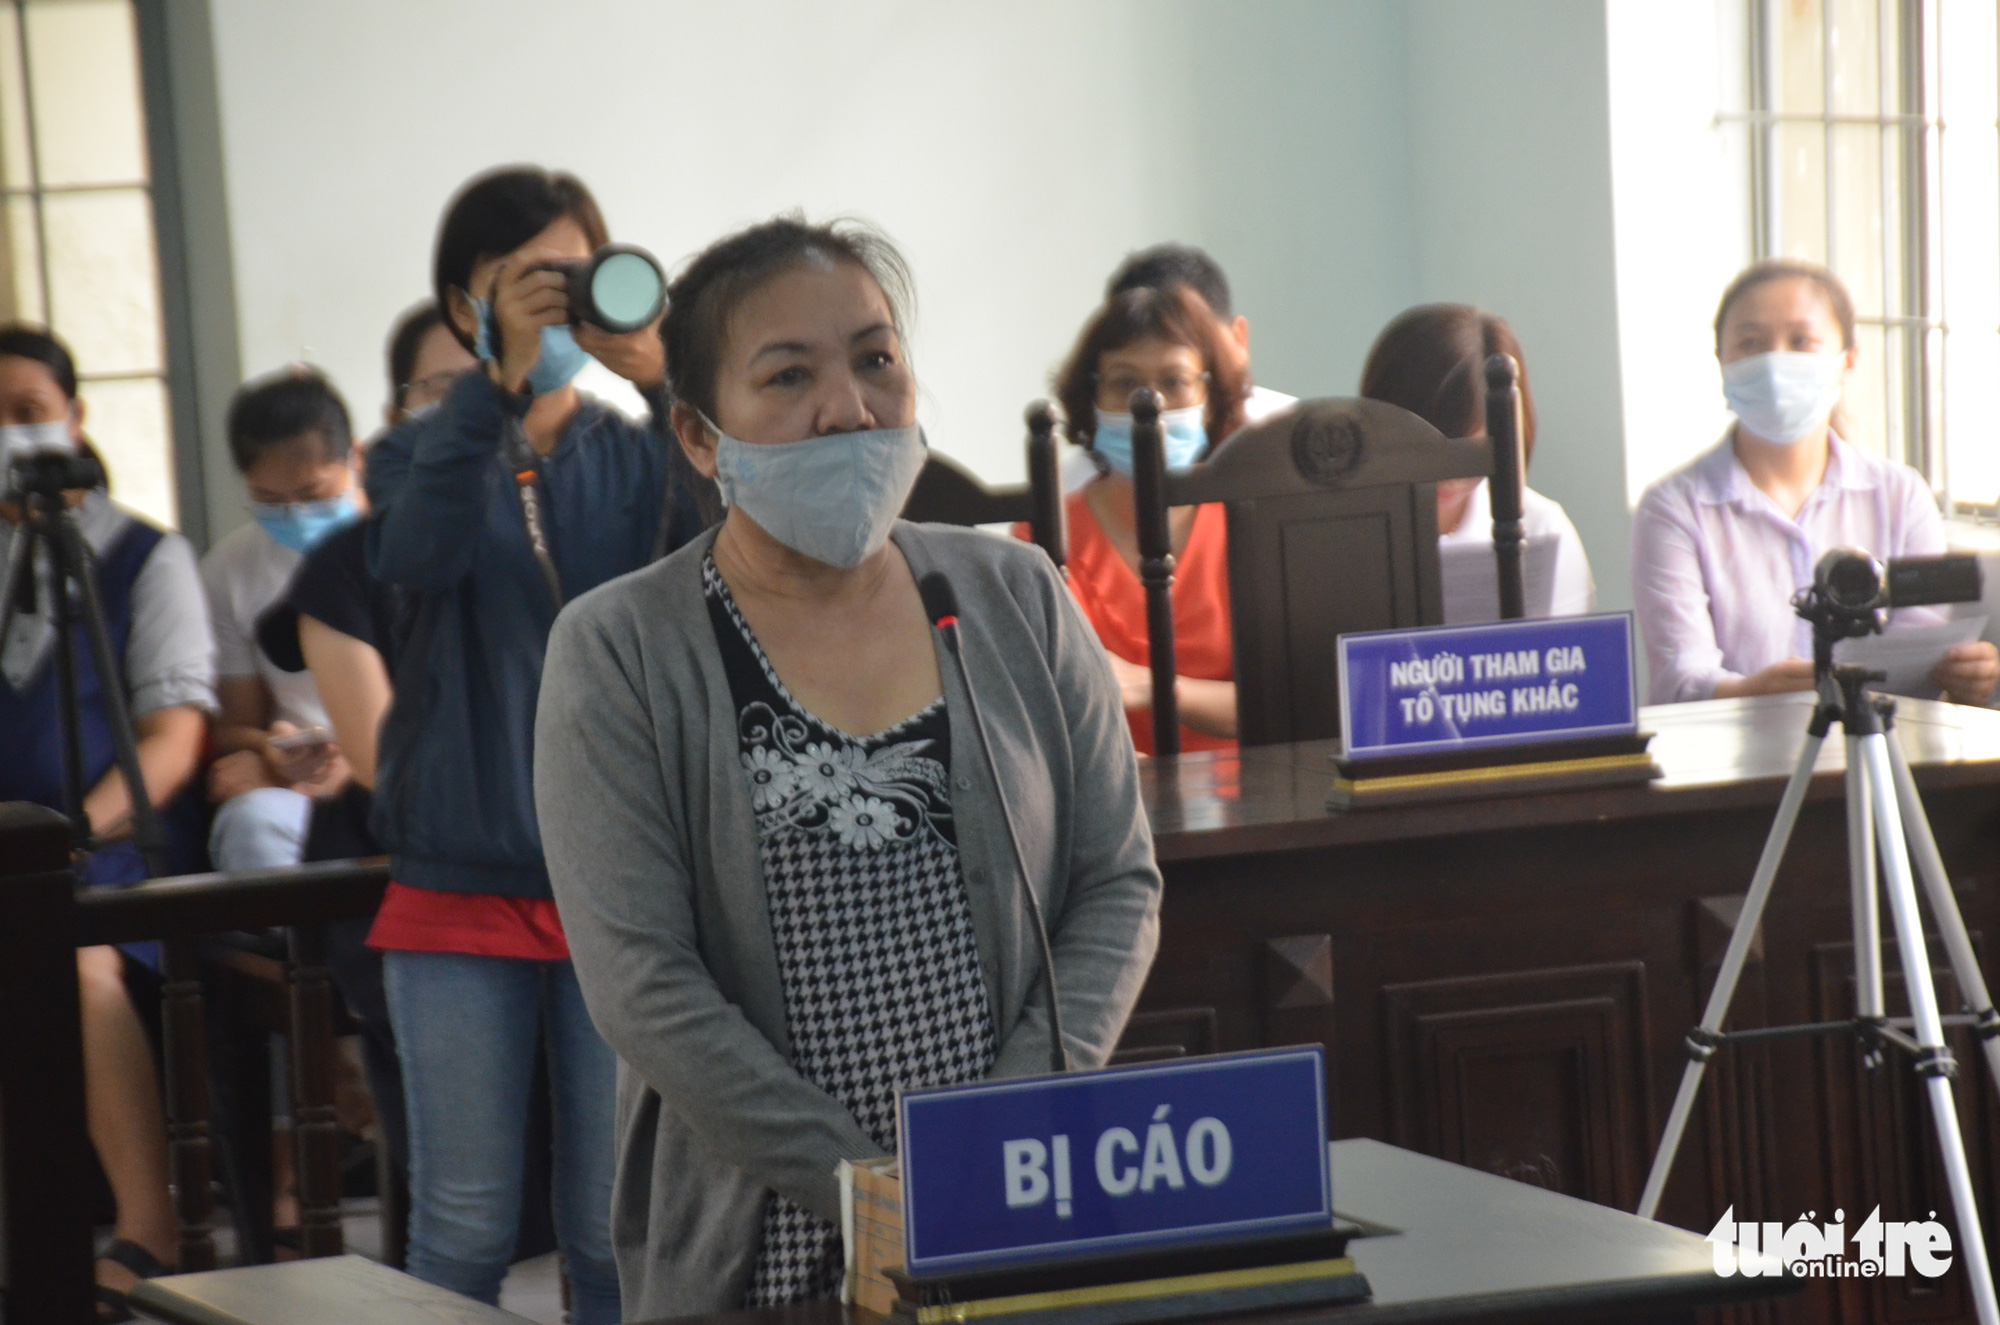 Duong Thi Sen stands her trial at the People’s Court in Thu Duc District, Ho Chi Minh City, September 12, 2020. Photo: Minh Hoa / Tuoi Tre